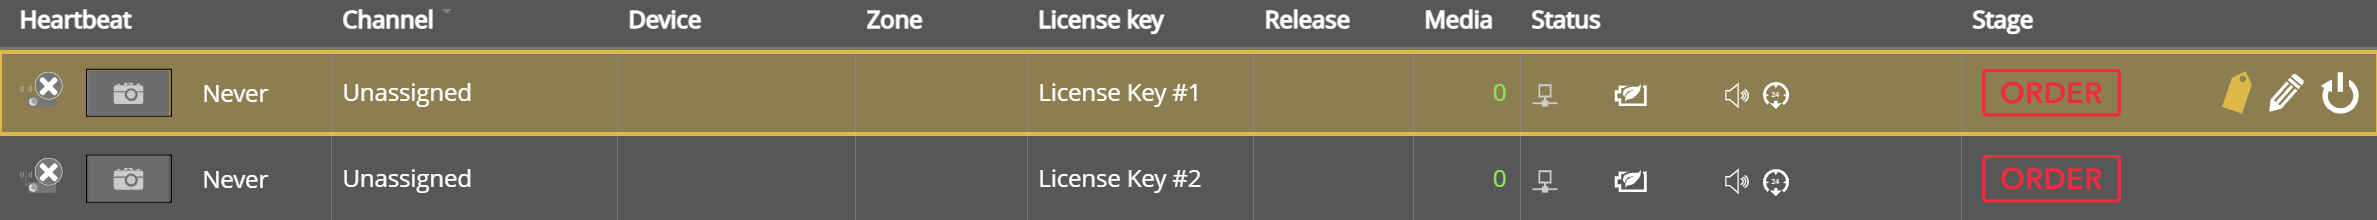 License Key #1 is selected.